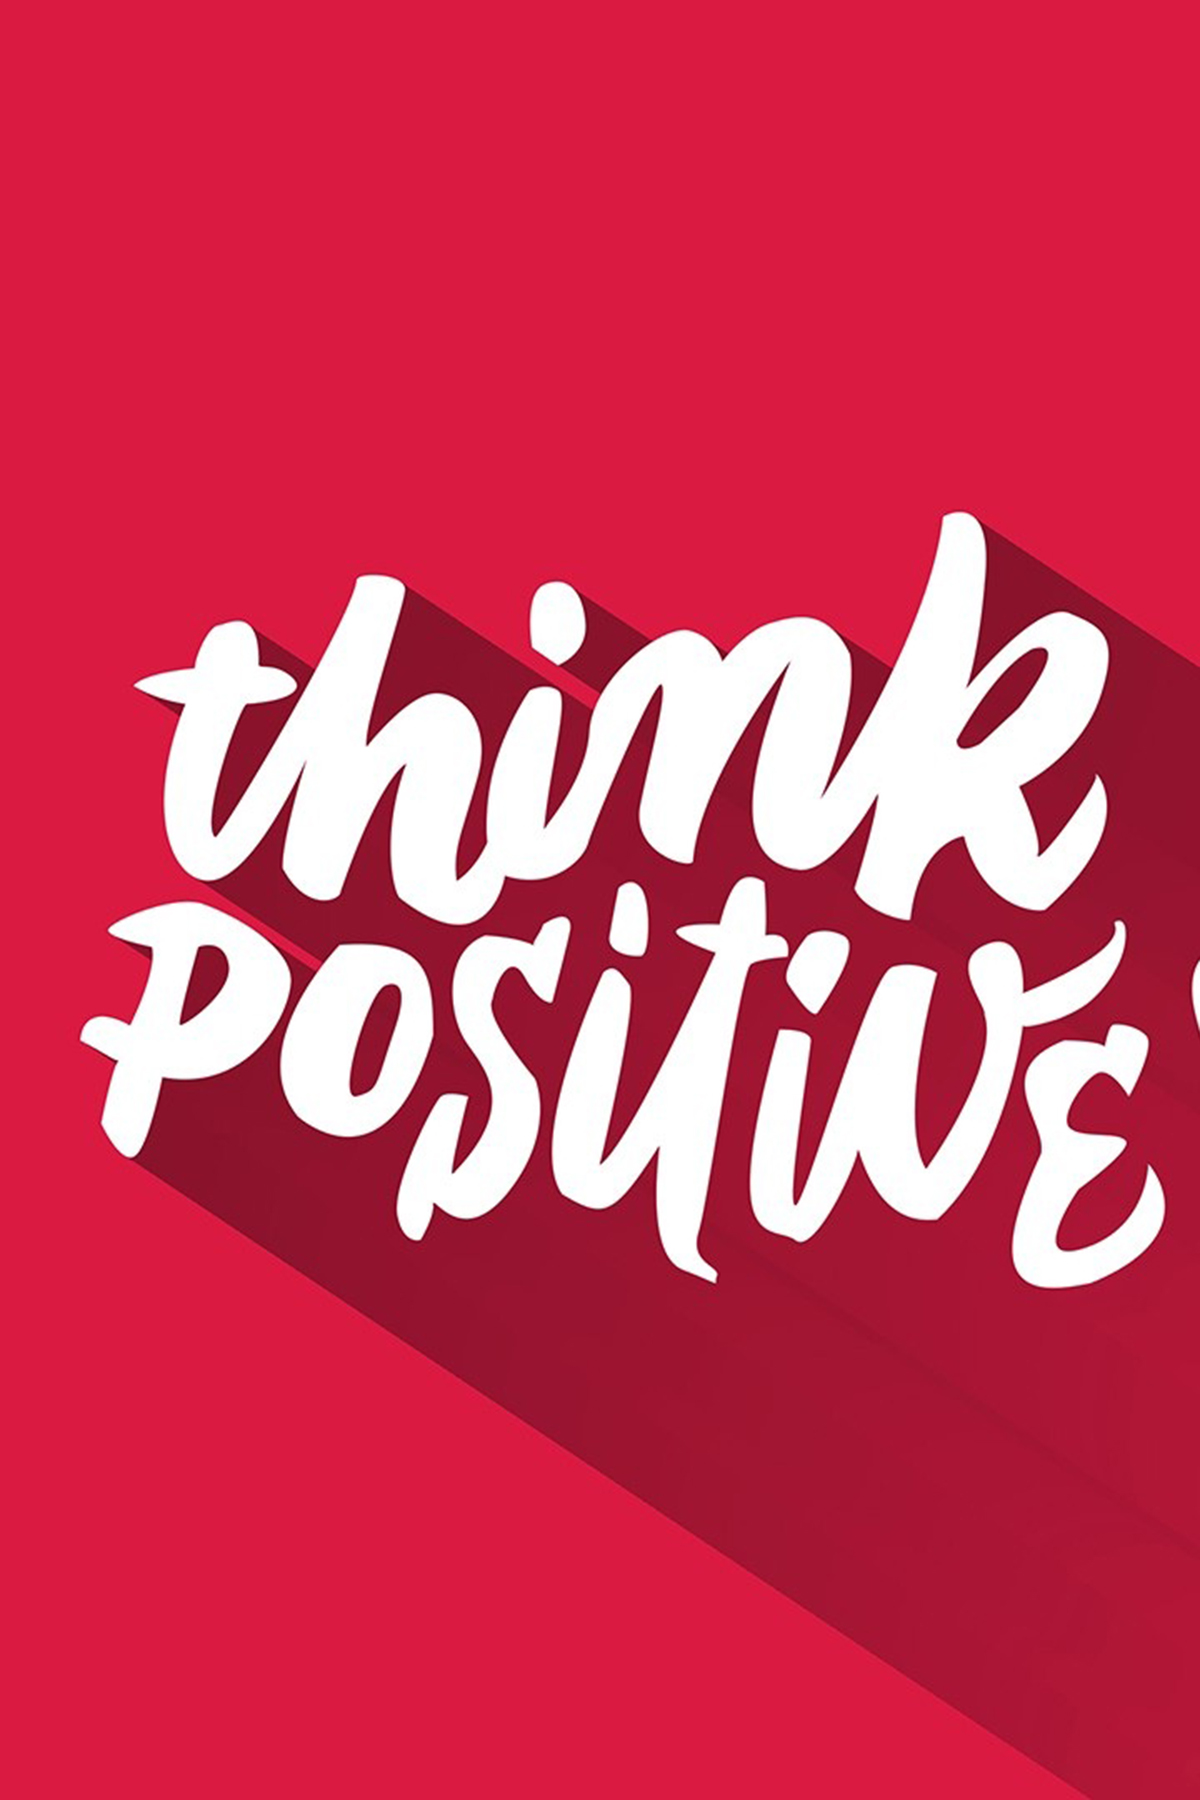 Think Positive Motivational Quotes Photos Mobile Wallpaper - Calligraphy , HD Wallpaper & Backgrounds